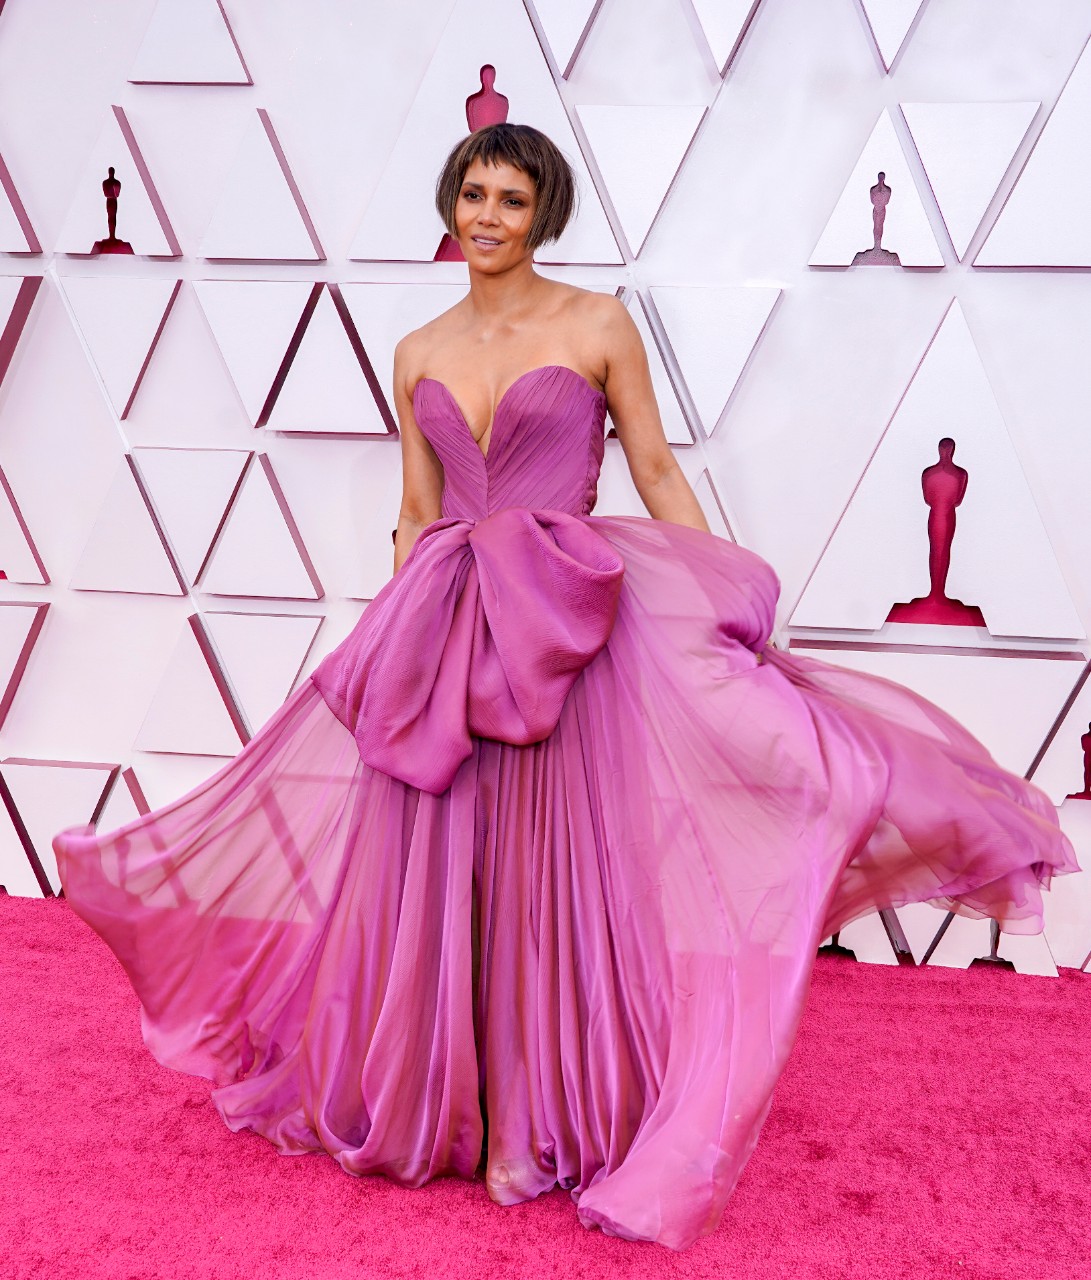 LOS ANGELES, CALIFORNIA â   APRIL 25: Halle Berry attends the 93rd Annual Academy Awards at Union Station on April 25, 2021 in Los Angeles, California. (Photo by Chris Pizzello-Pool/Getty Images)